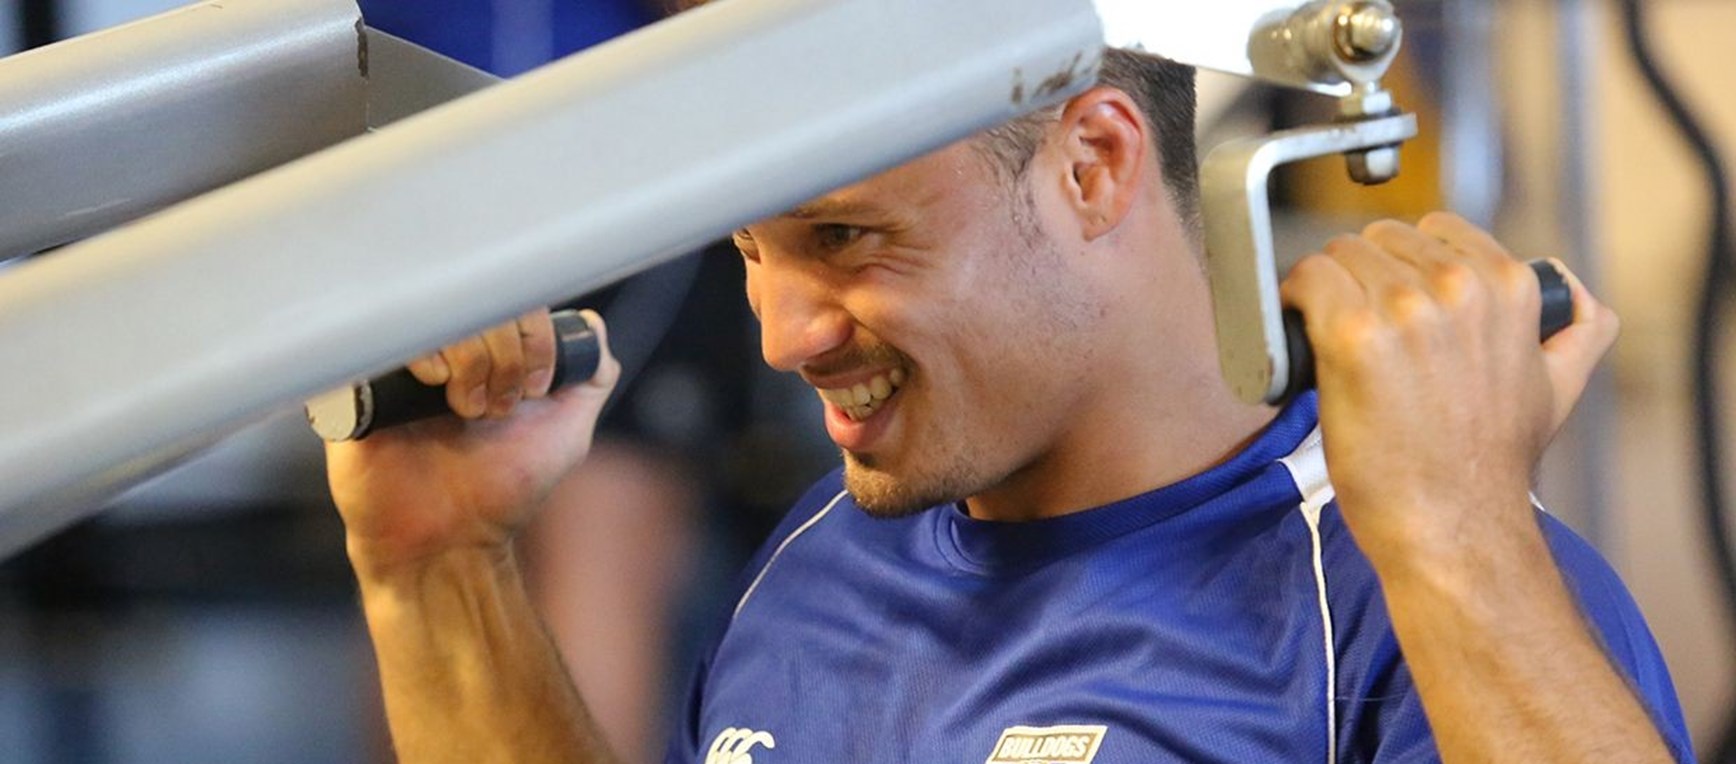 GALLERY: Players hit the Gym